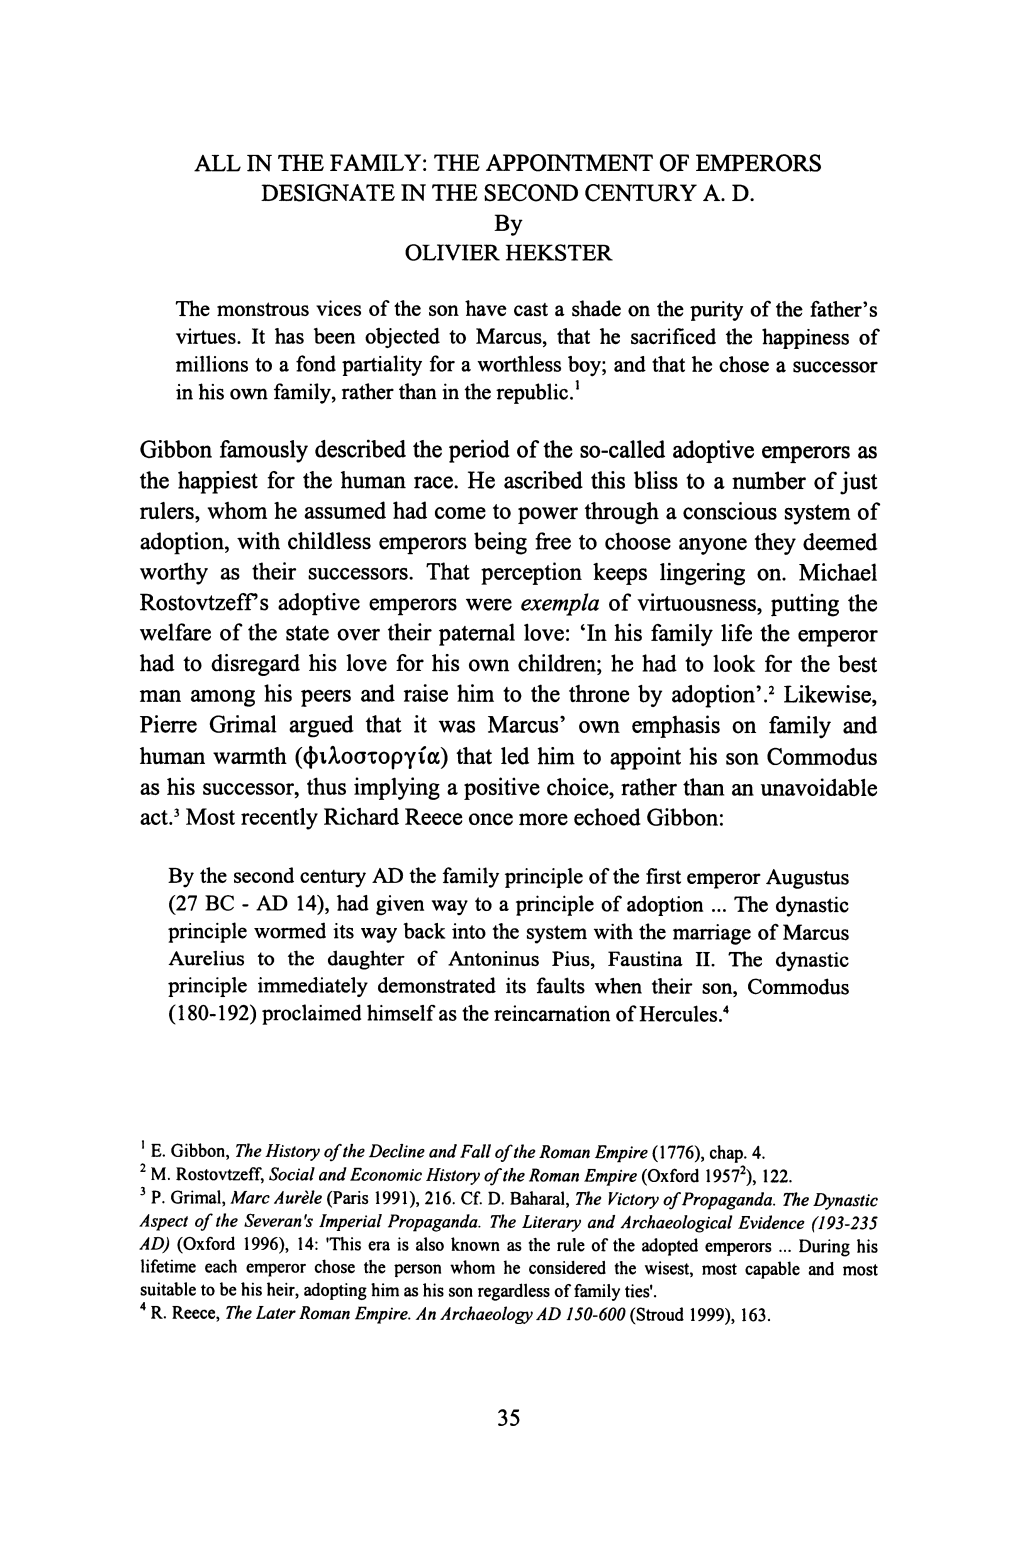 The Appointment of Emperors Designate in the Second Century A